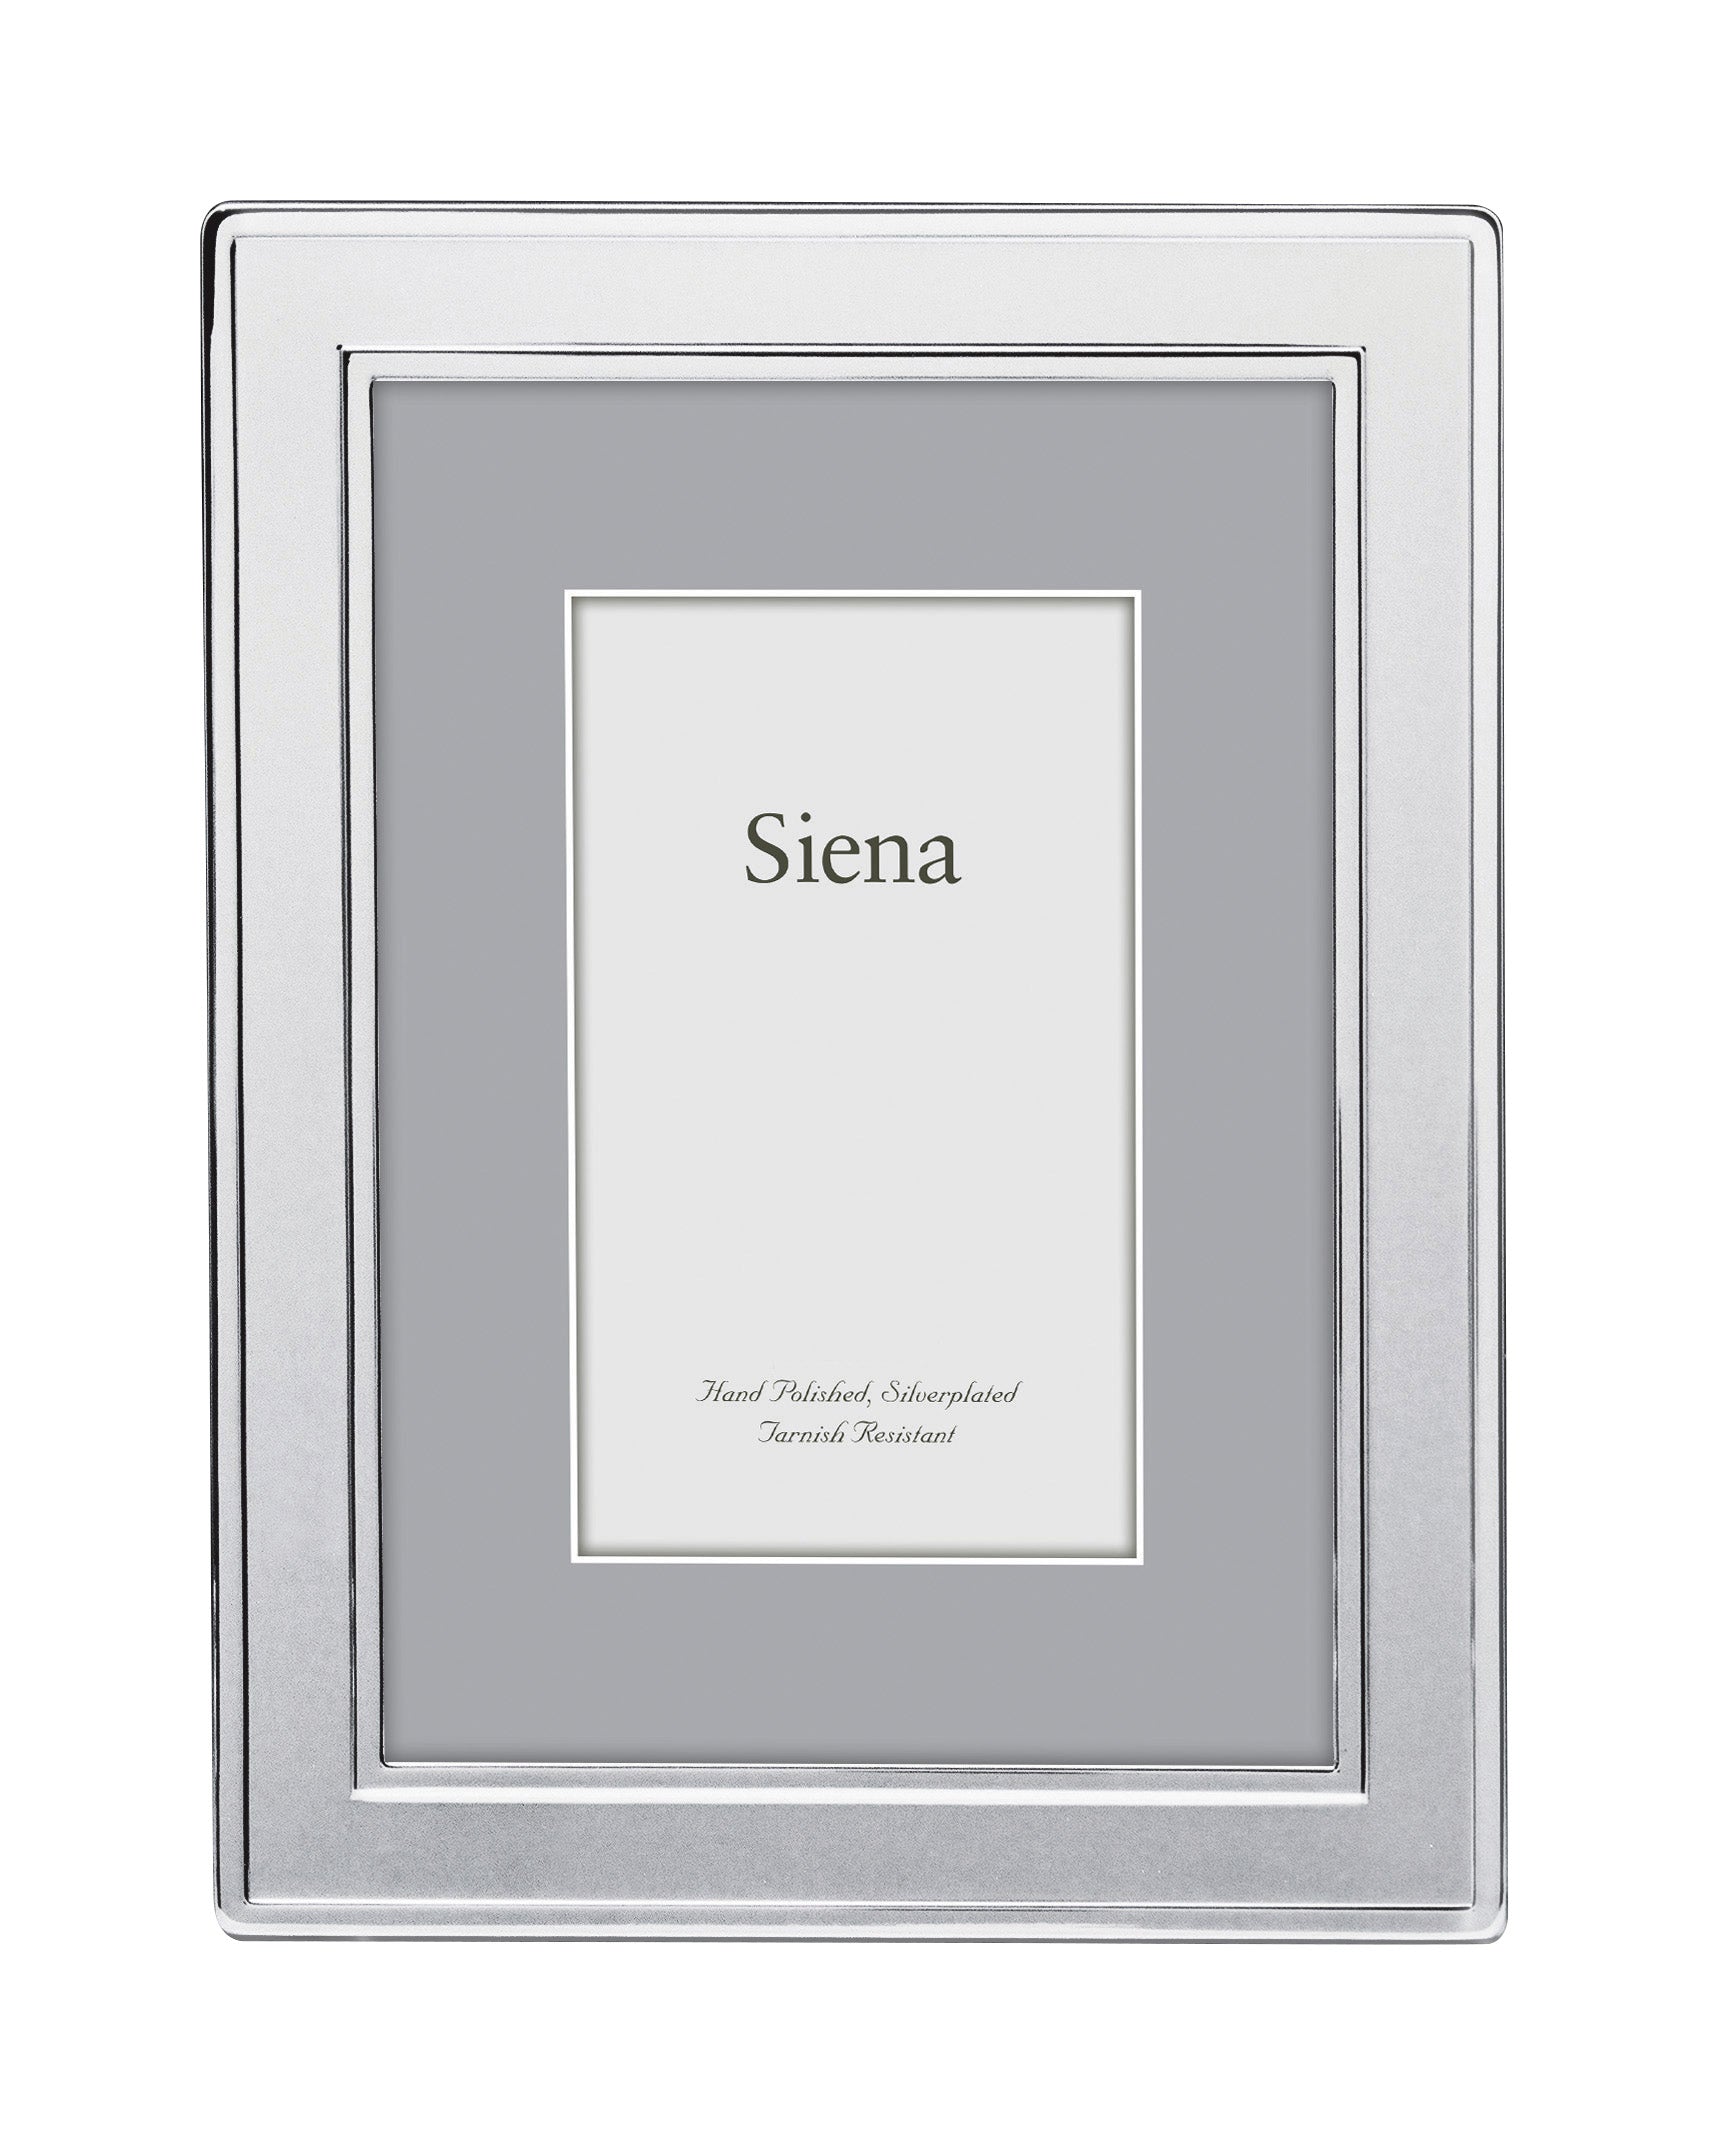 5 x 7 Silver-Plate Frame with Double Border